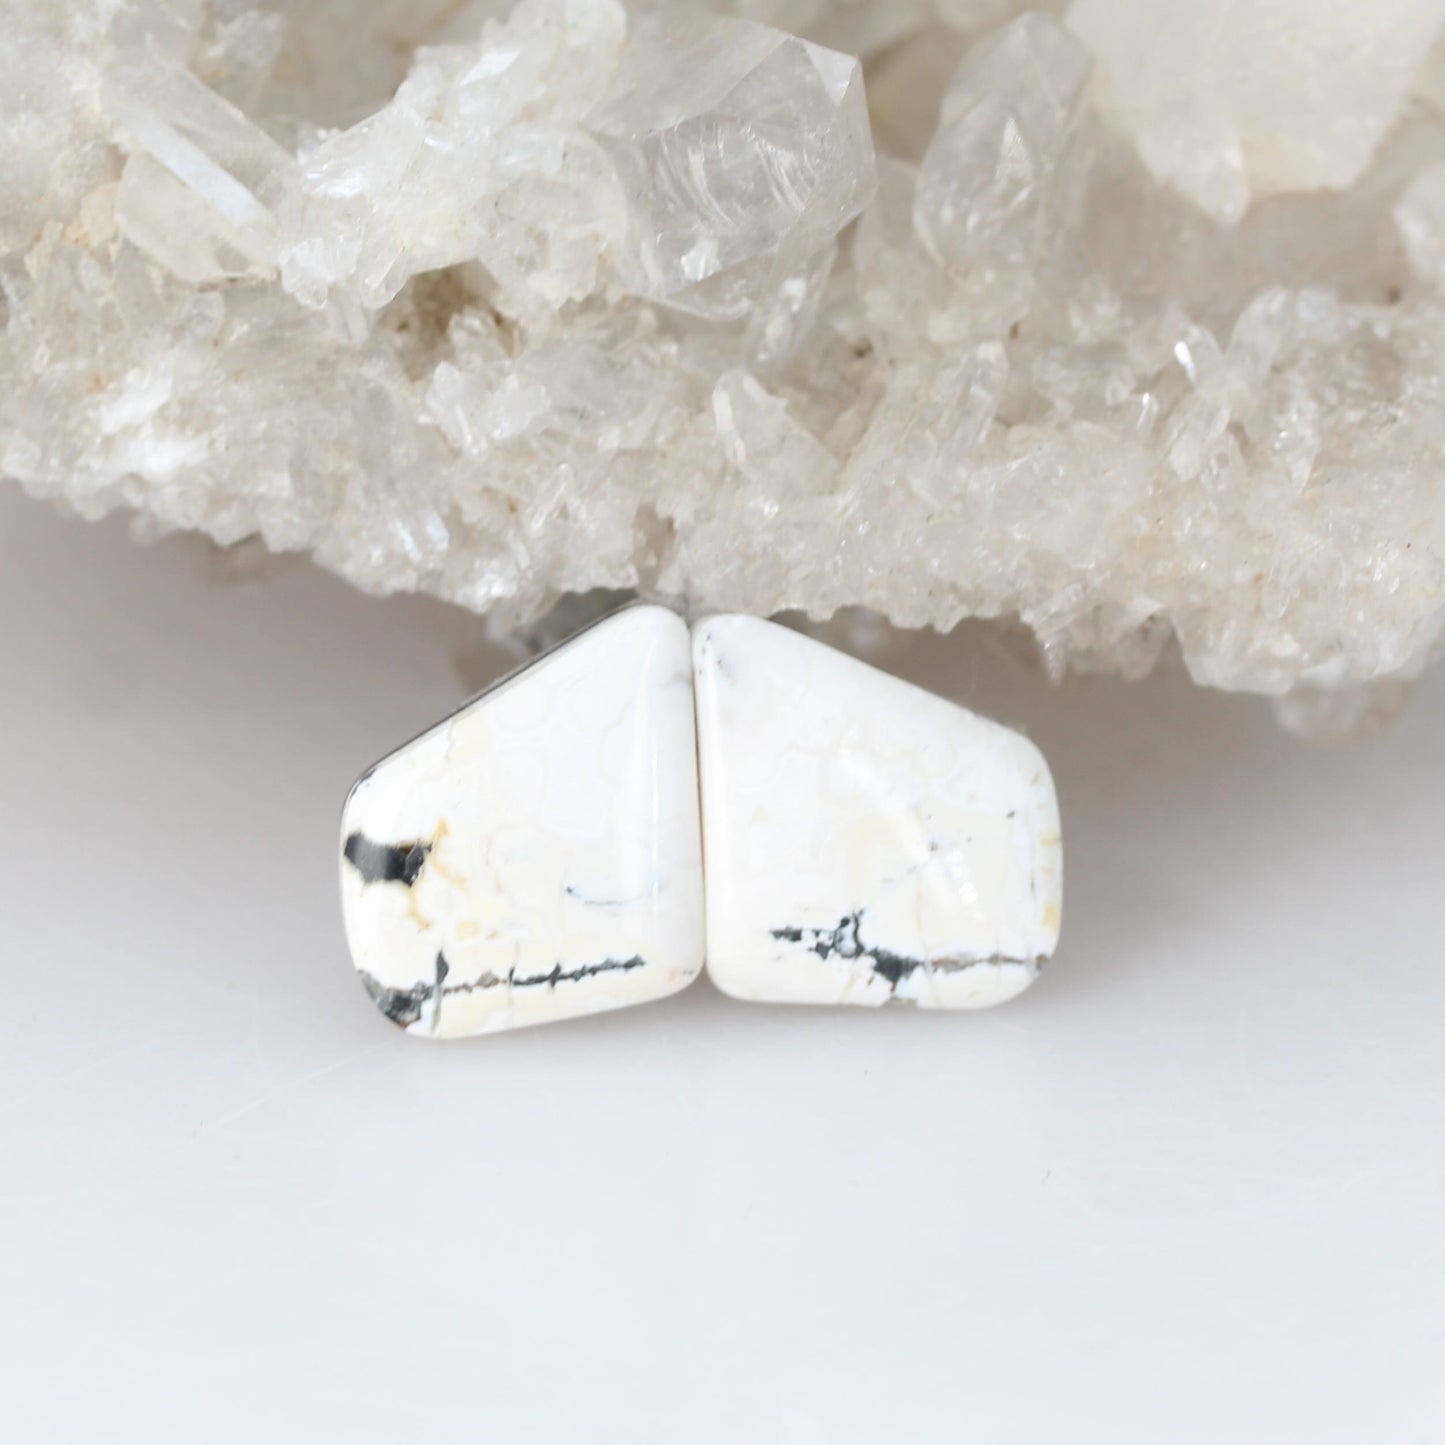 Dramatic Rare White Buffalo Turquoise Cabochon Pair Components